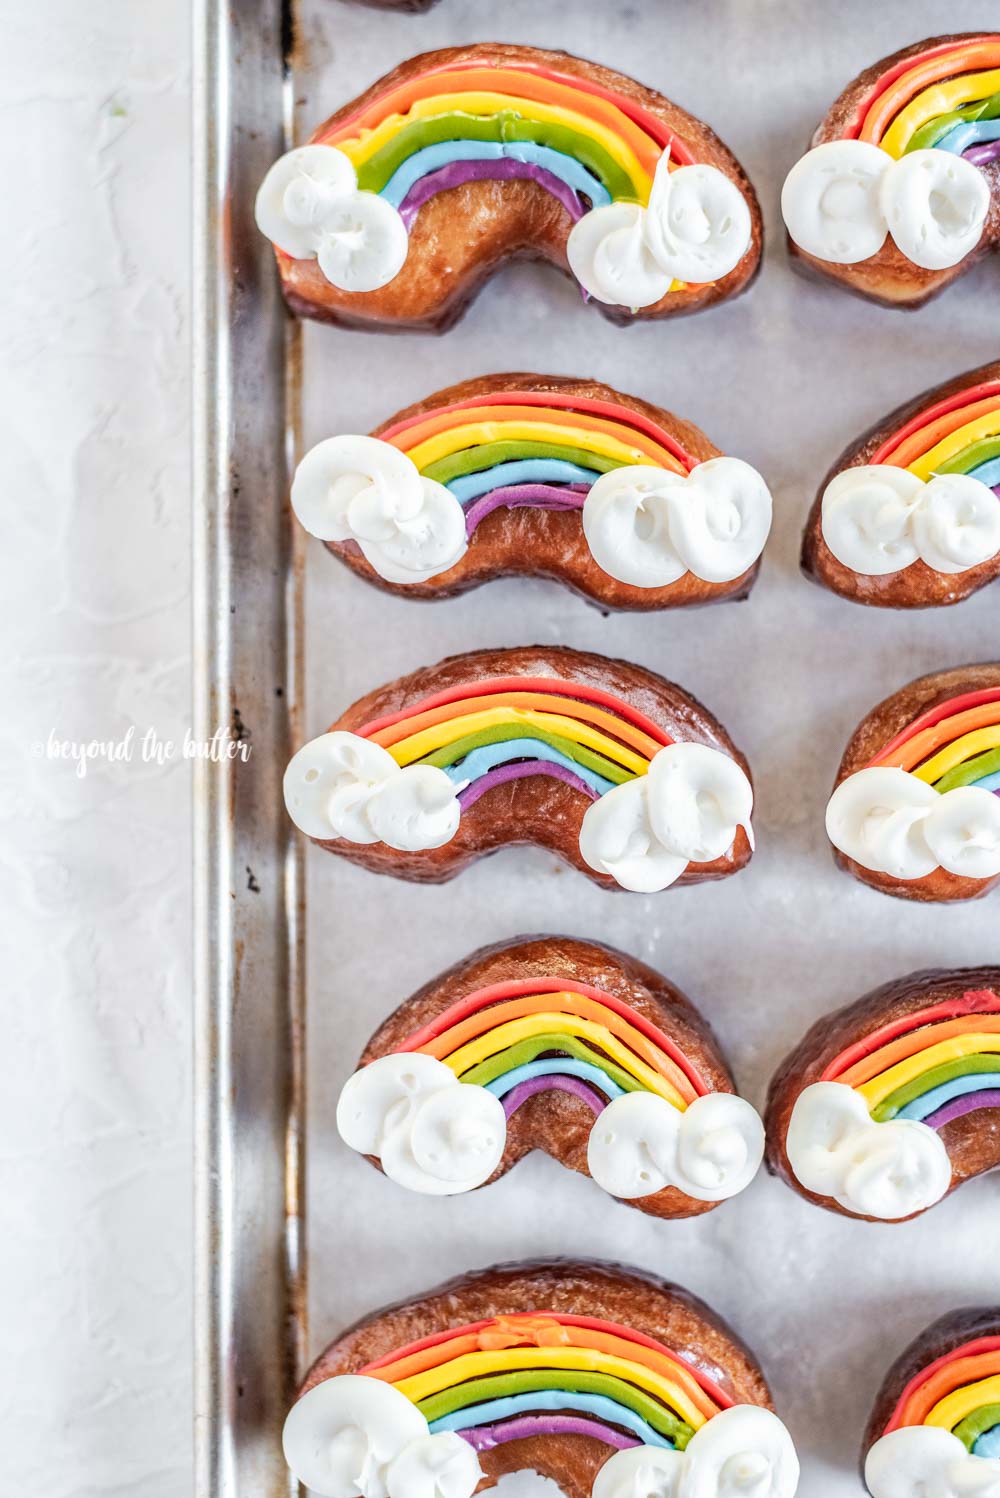 Overhead image of homemade Rainbow Donuts | All Images © Beyond the Butter, LLC